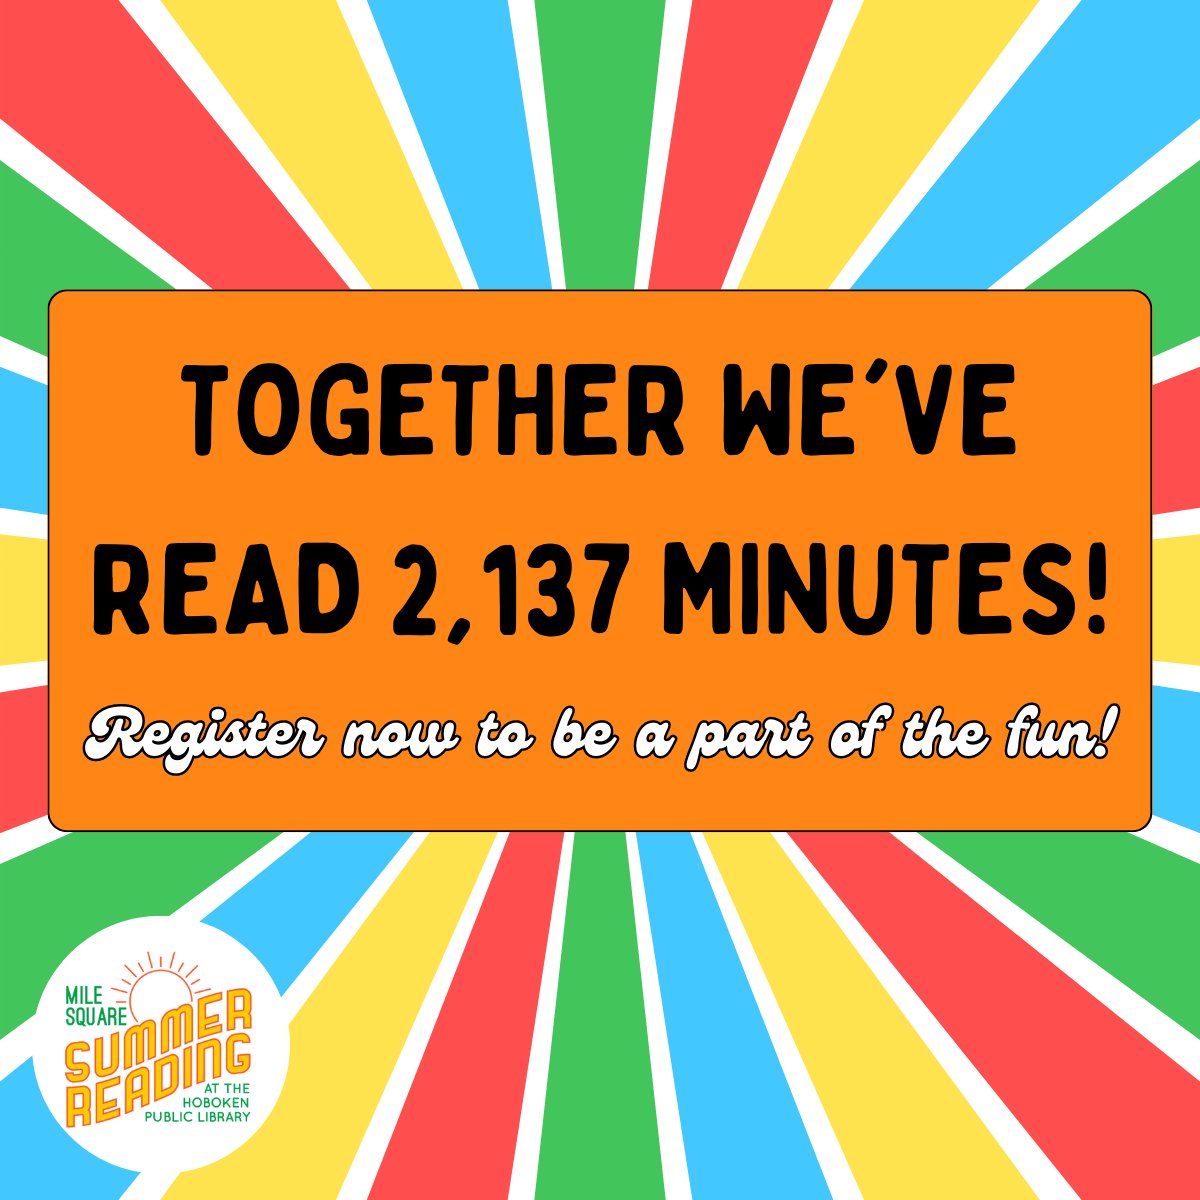 We are only a few days into Summer Reading and our kids have already logged over 2,000 minutes! Join in on the summer fun and challenge your little reader to read 1,000 minutes this summer. Register now at HobokenLibrary.org/SummerReading.